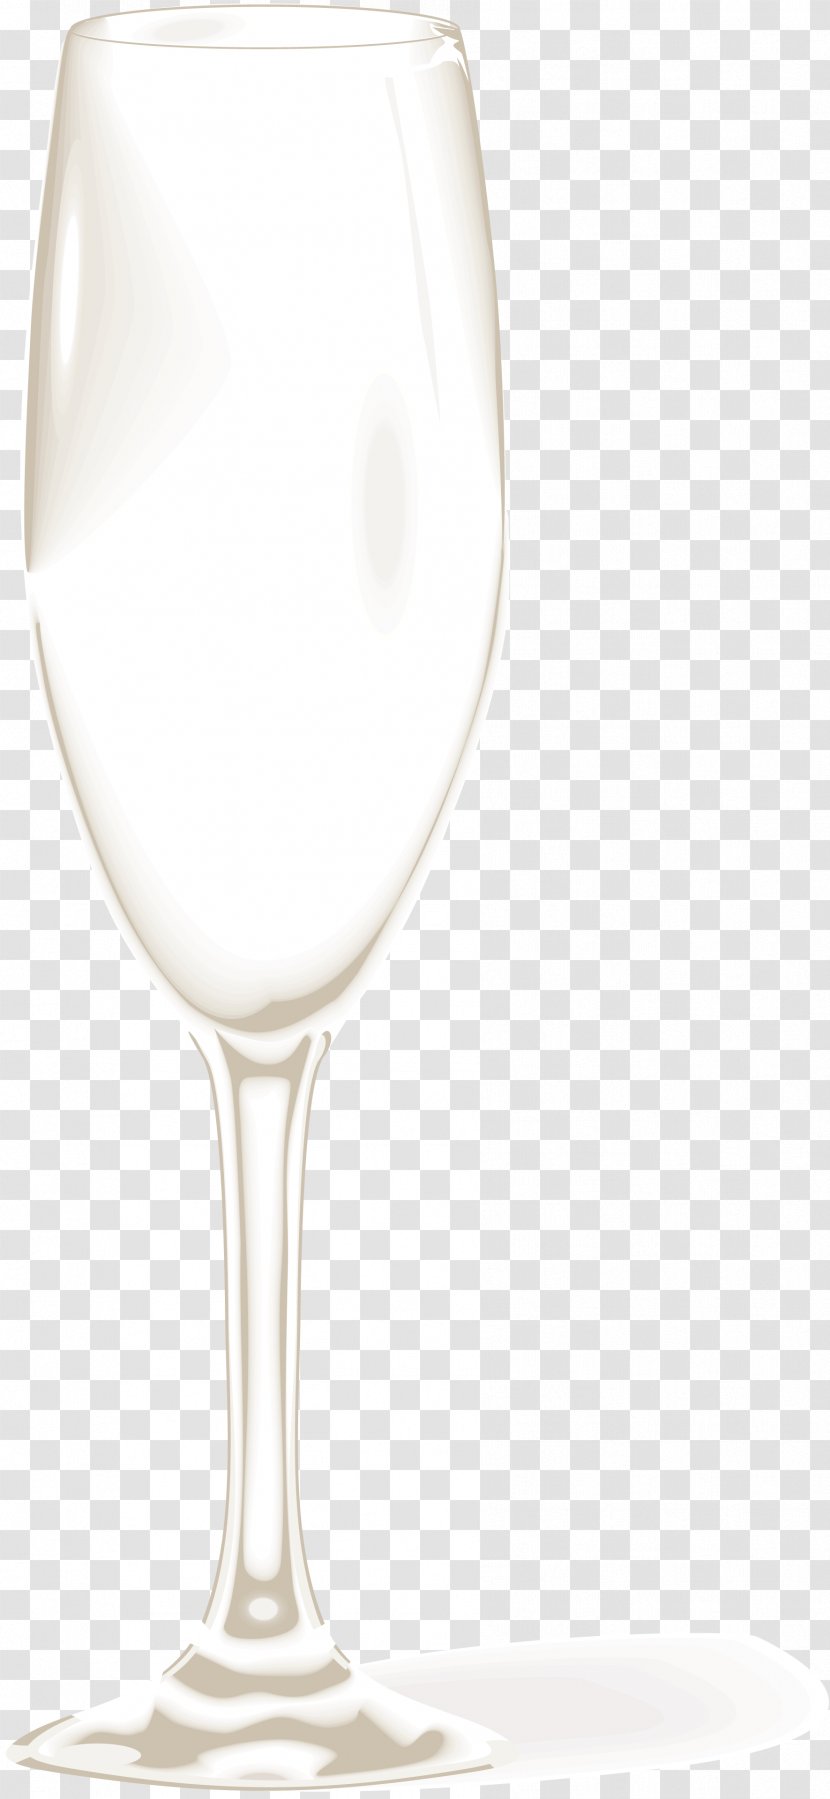 Champagne Glass Drink White Wine - Gastrointestinal Transparent PNG